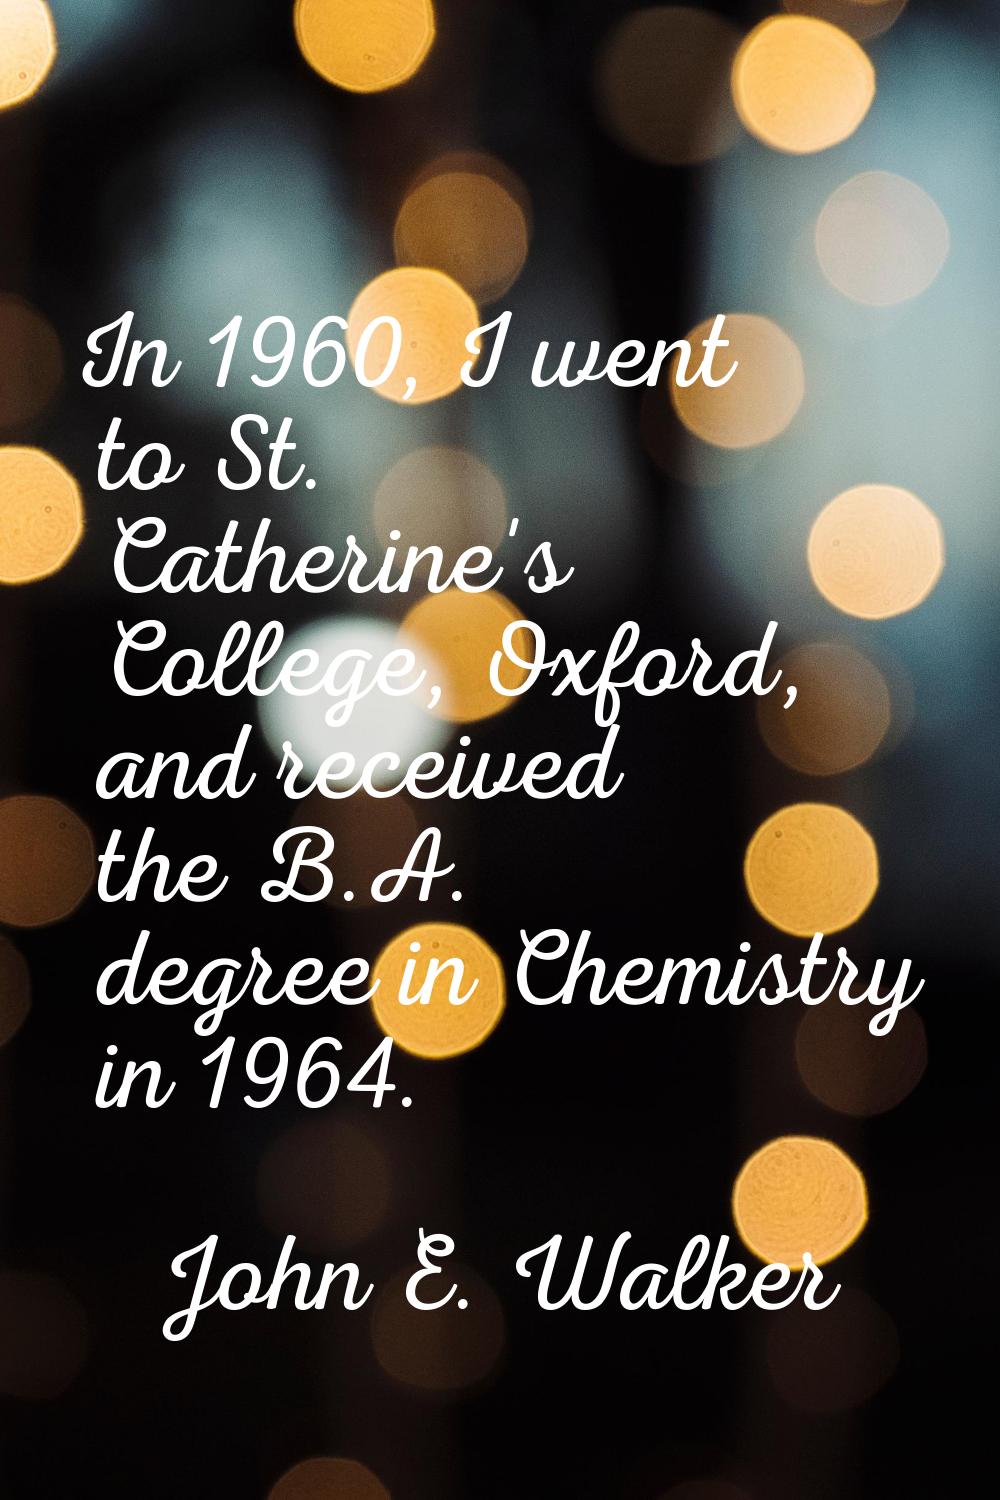 In 1960, I went to St. Catherine's College, Oxford, and received the B.A. degree in Chemistry in 19